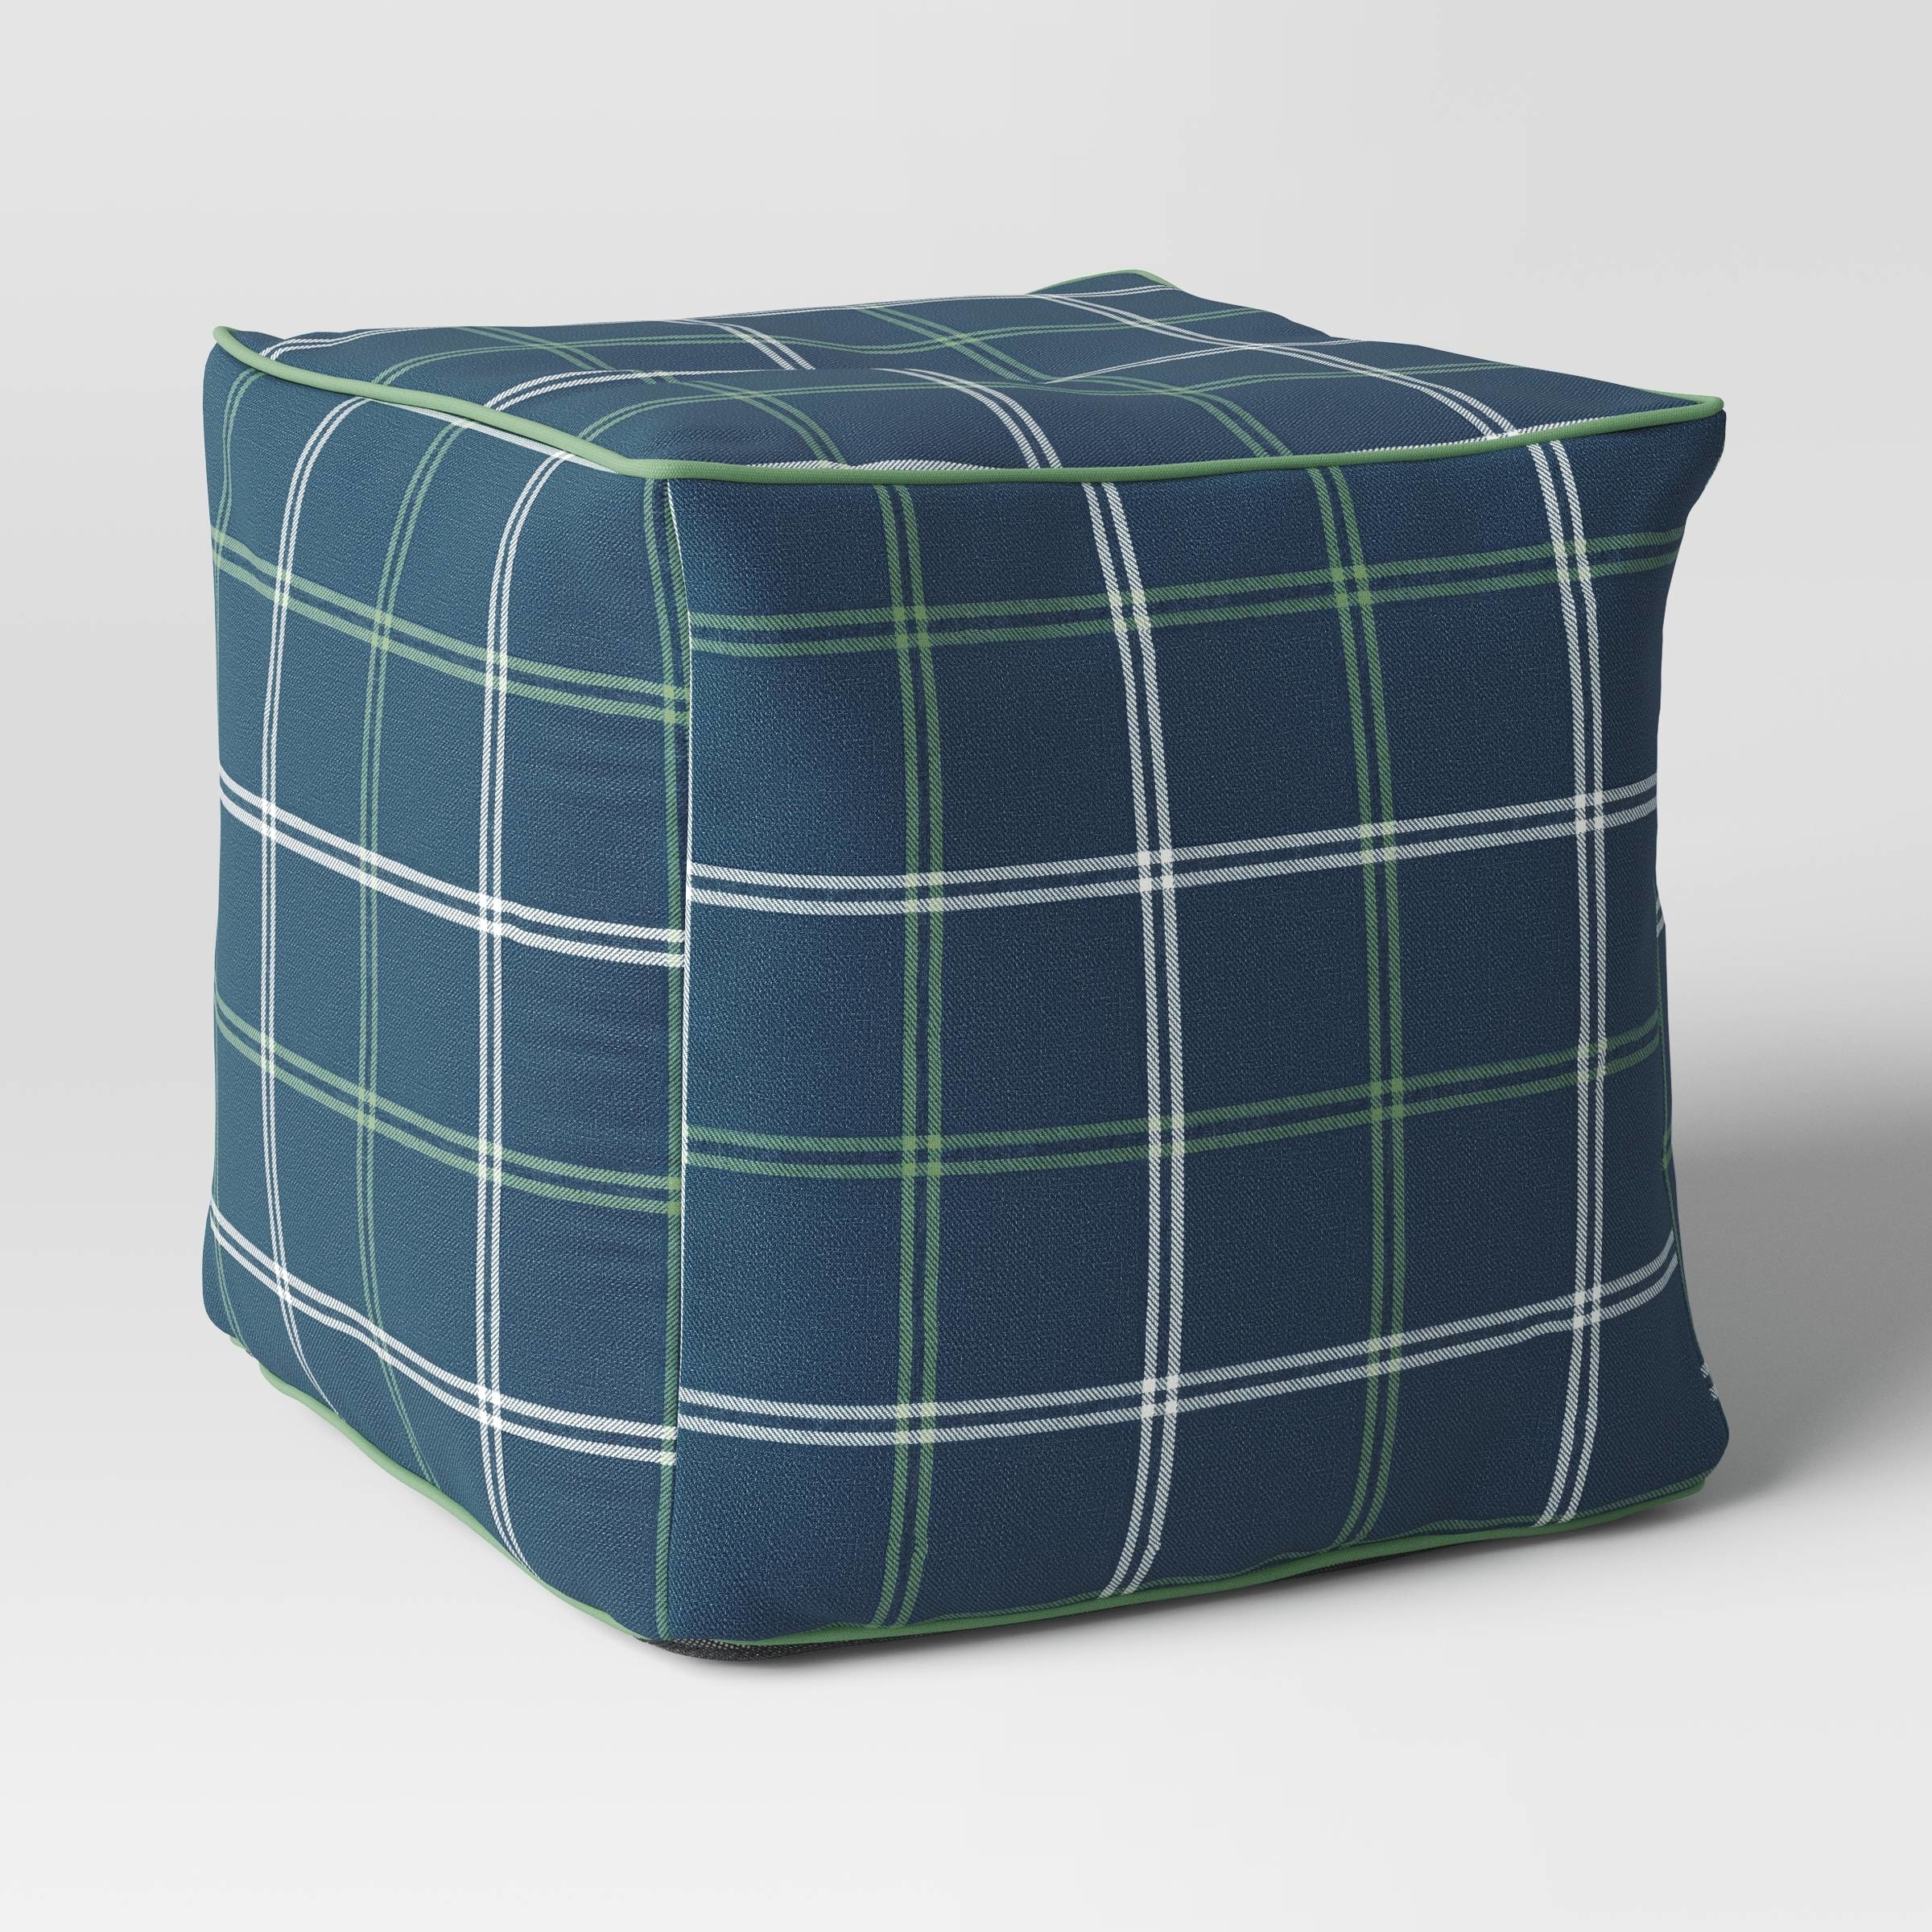 A plaid-patterned square ottoman on a plain background